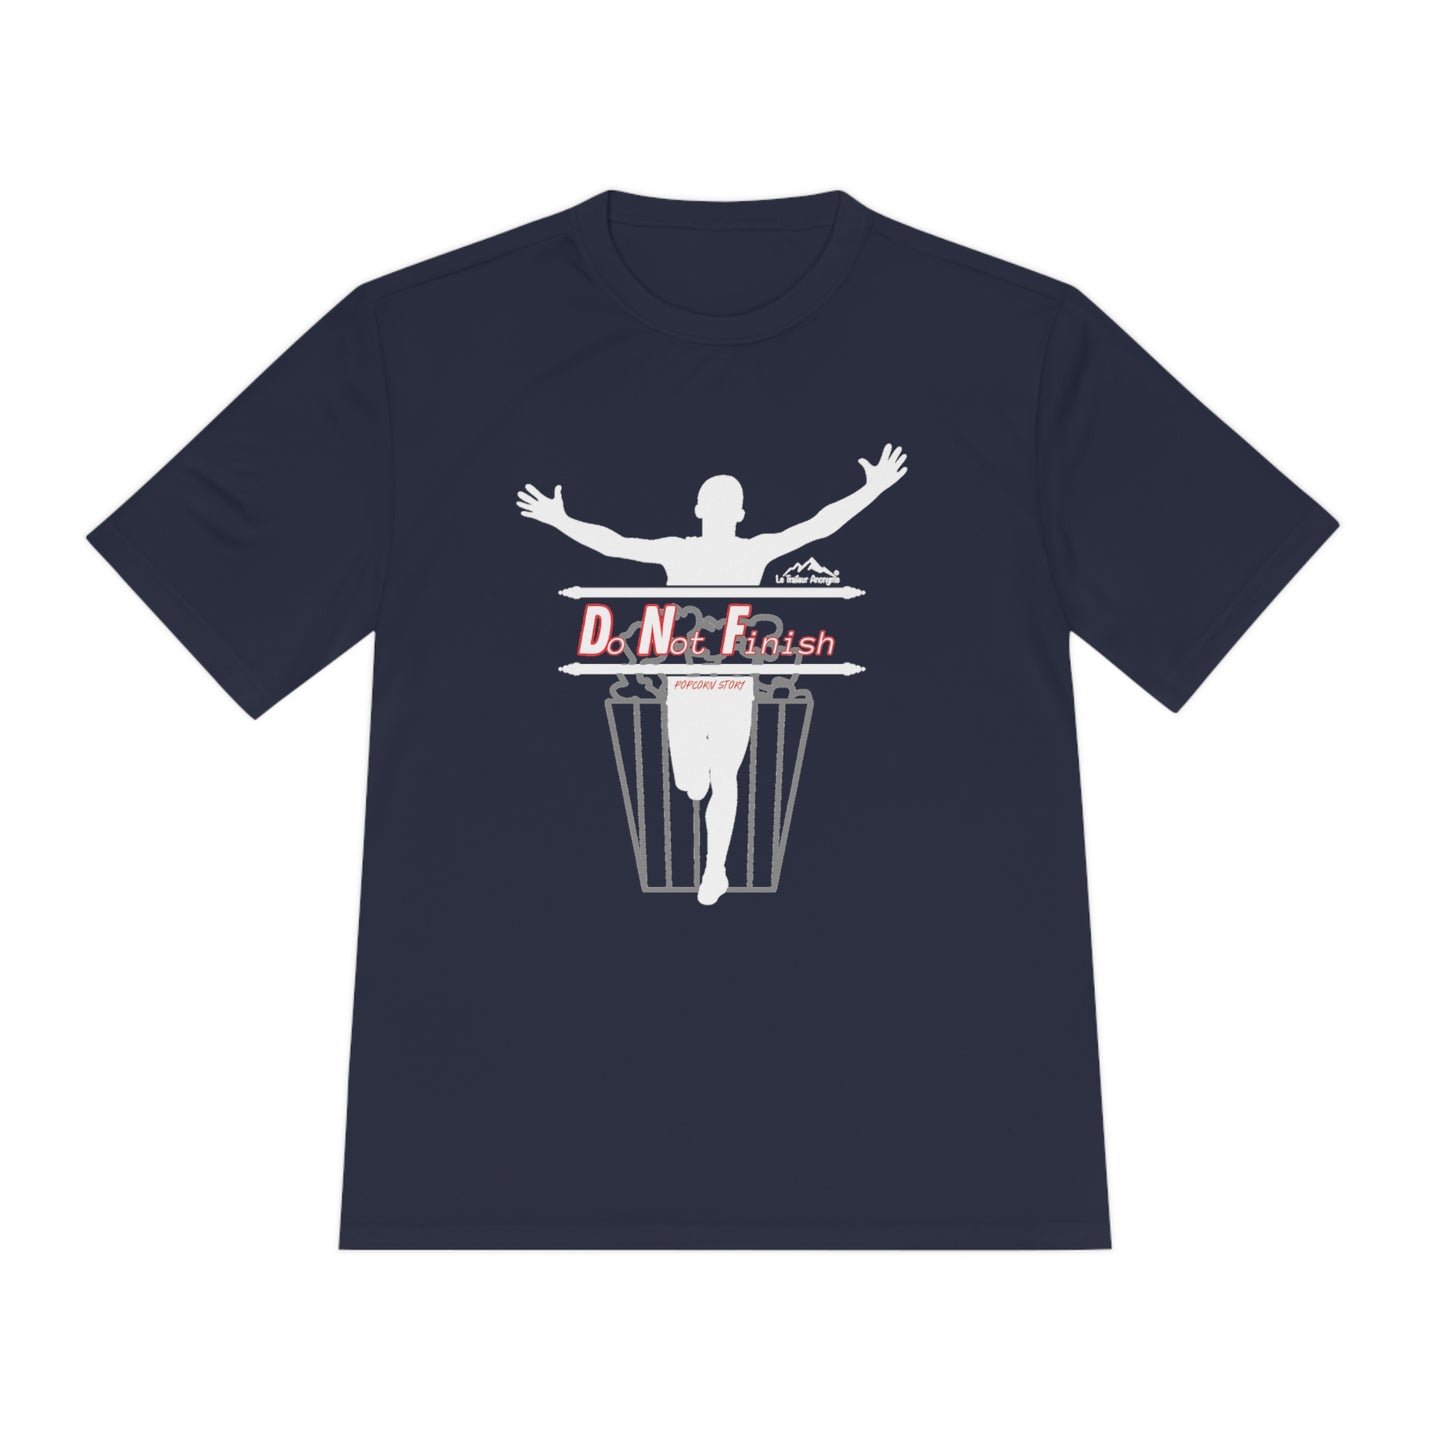 Sport-Tek® PosiCharge® Competitor™ T-Shirt - Unisex - “DNF” Collection (750)